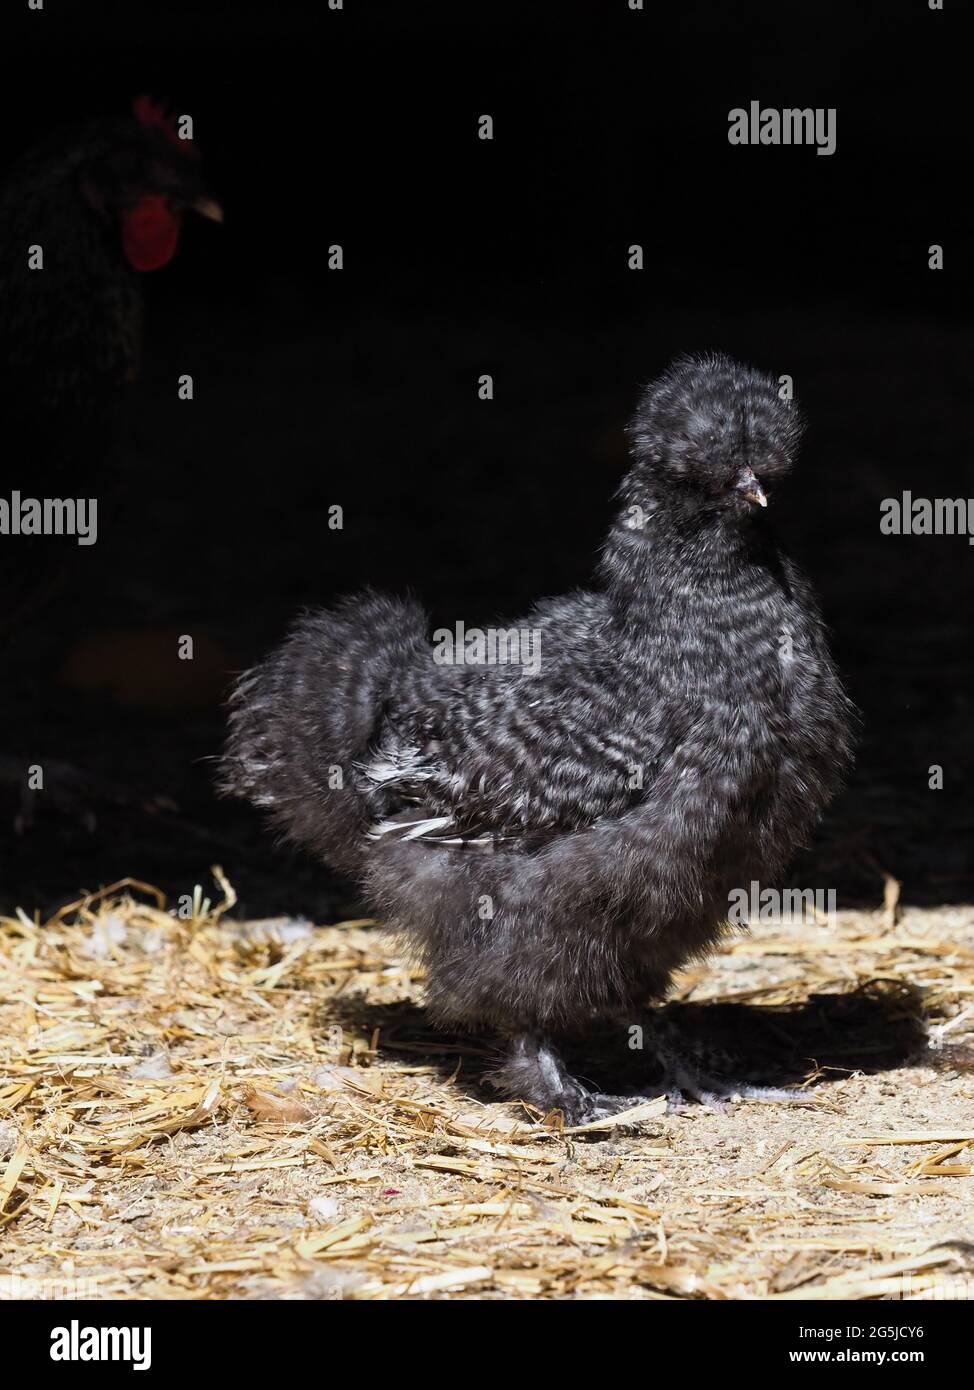 A rare breed chick against a black background. Stock Photo